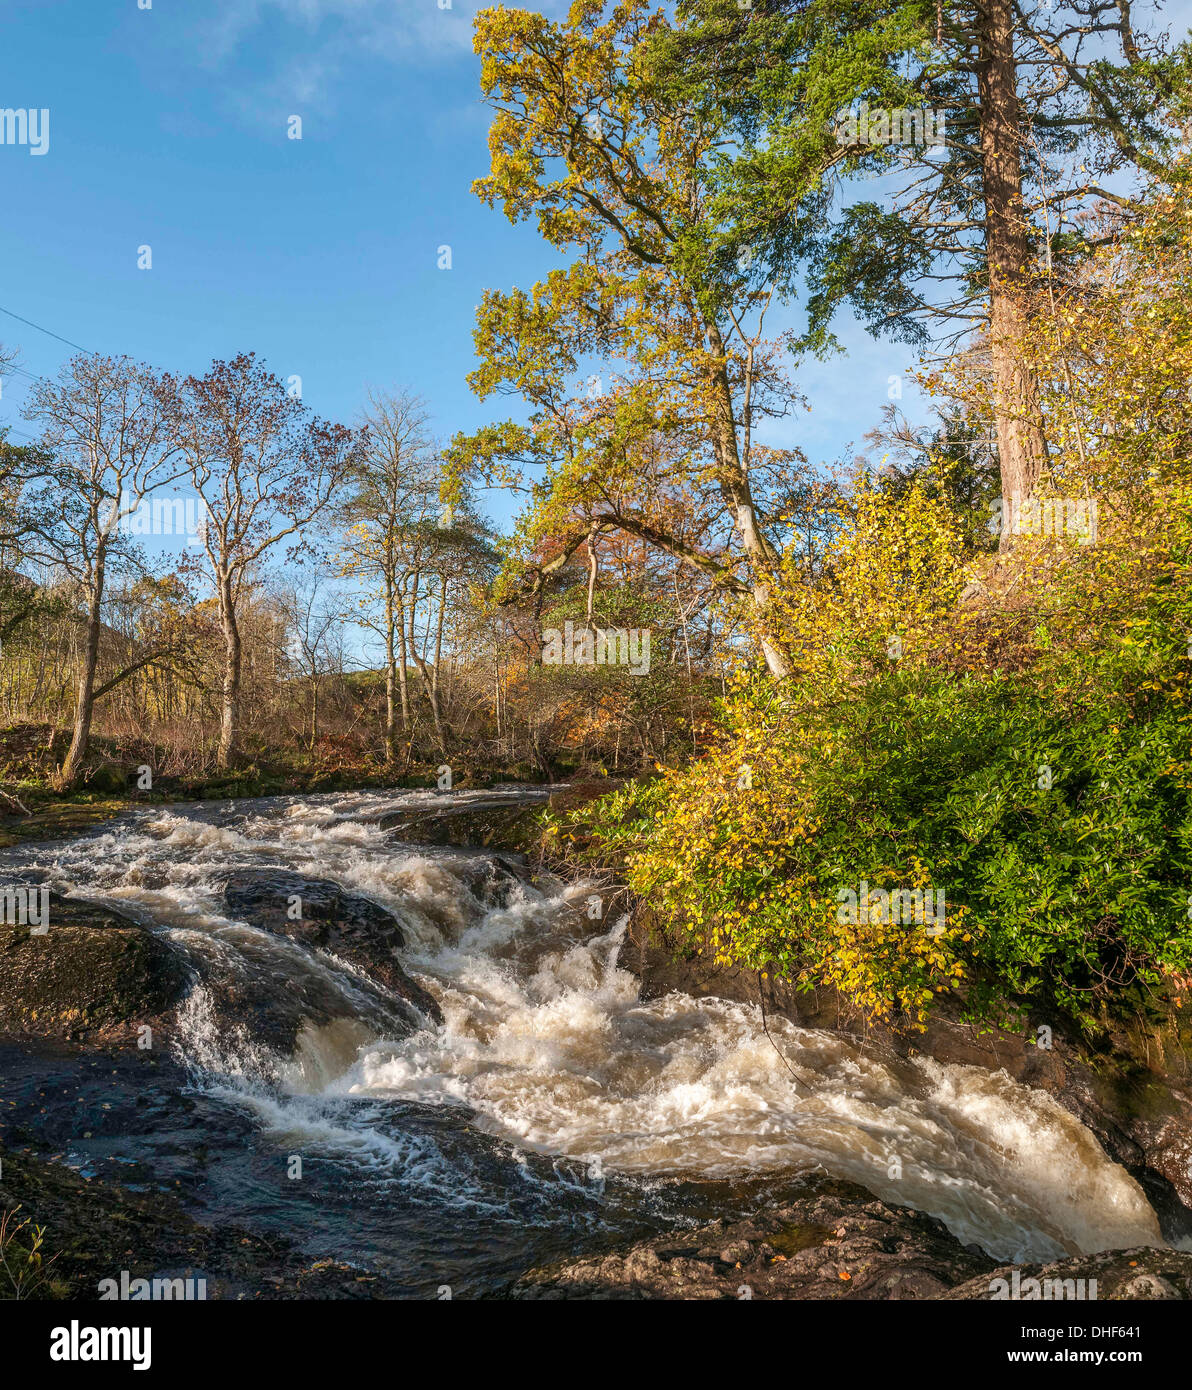 The Spouts of Buchanty in Perthshire on the river Almond. Stock Photo